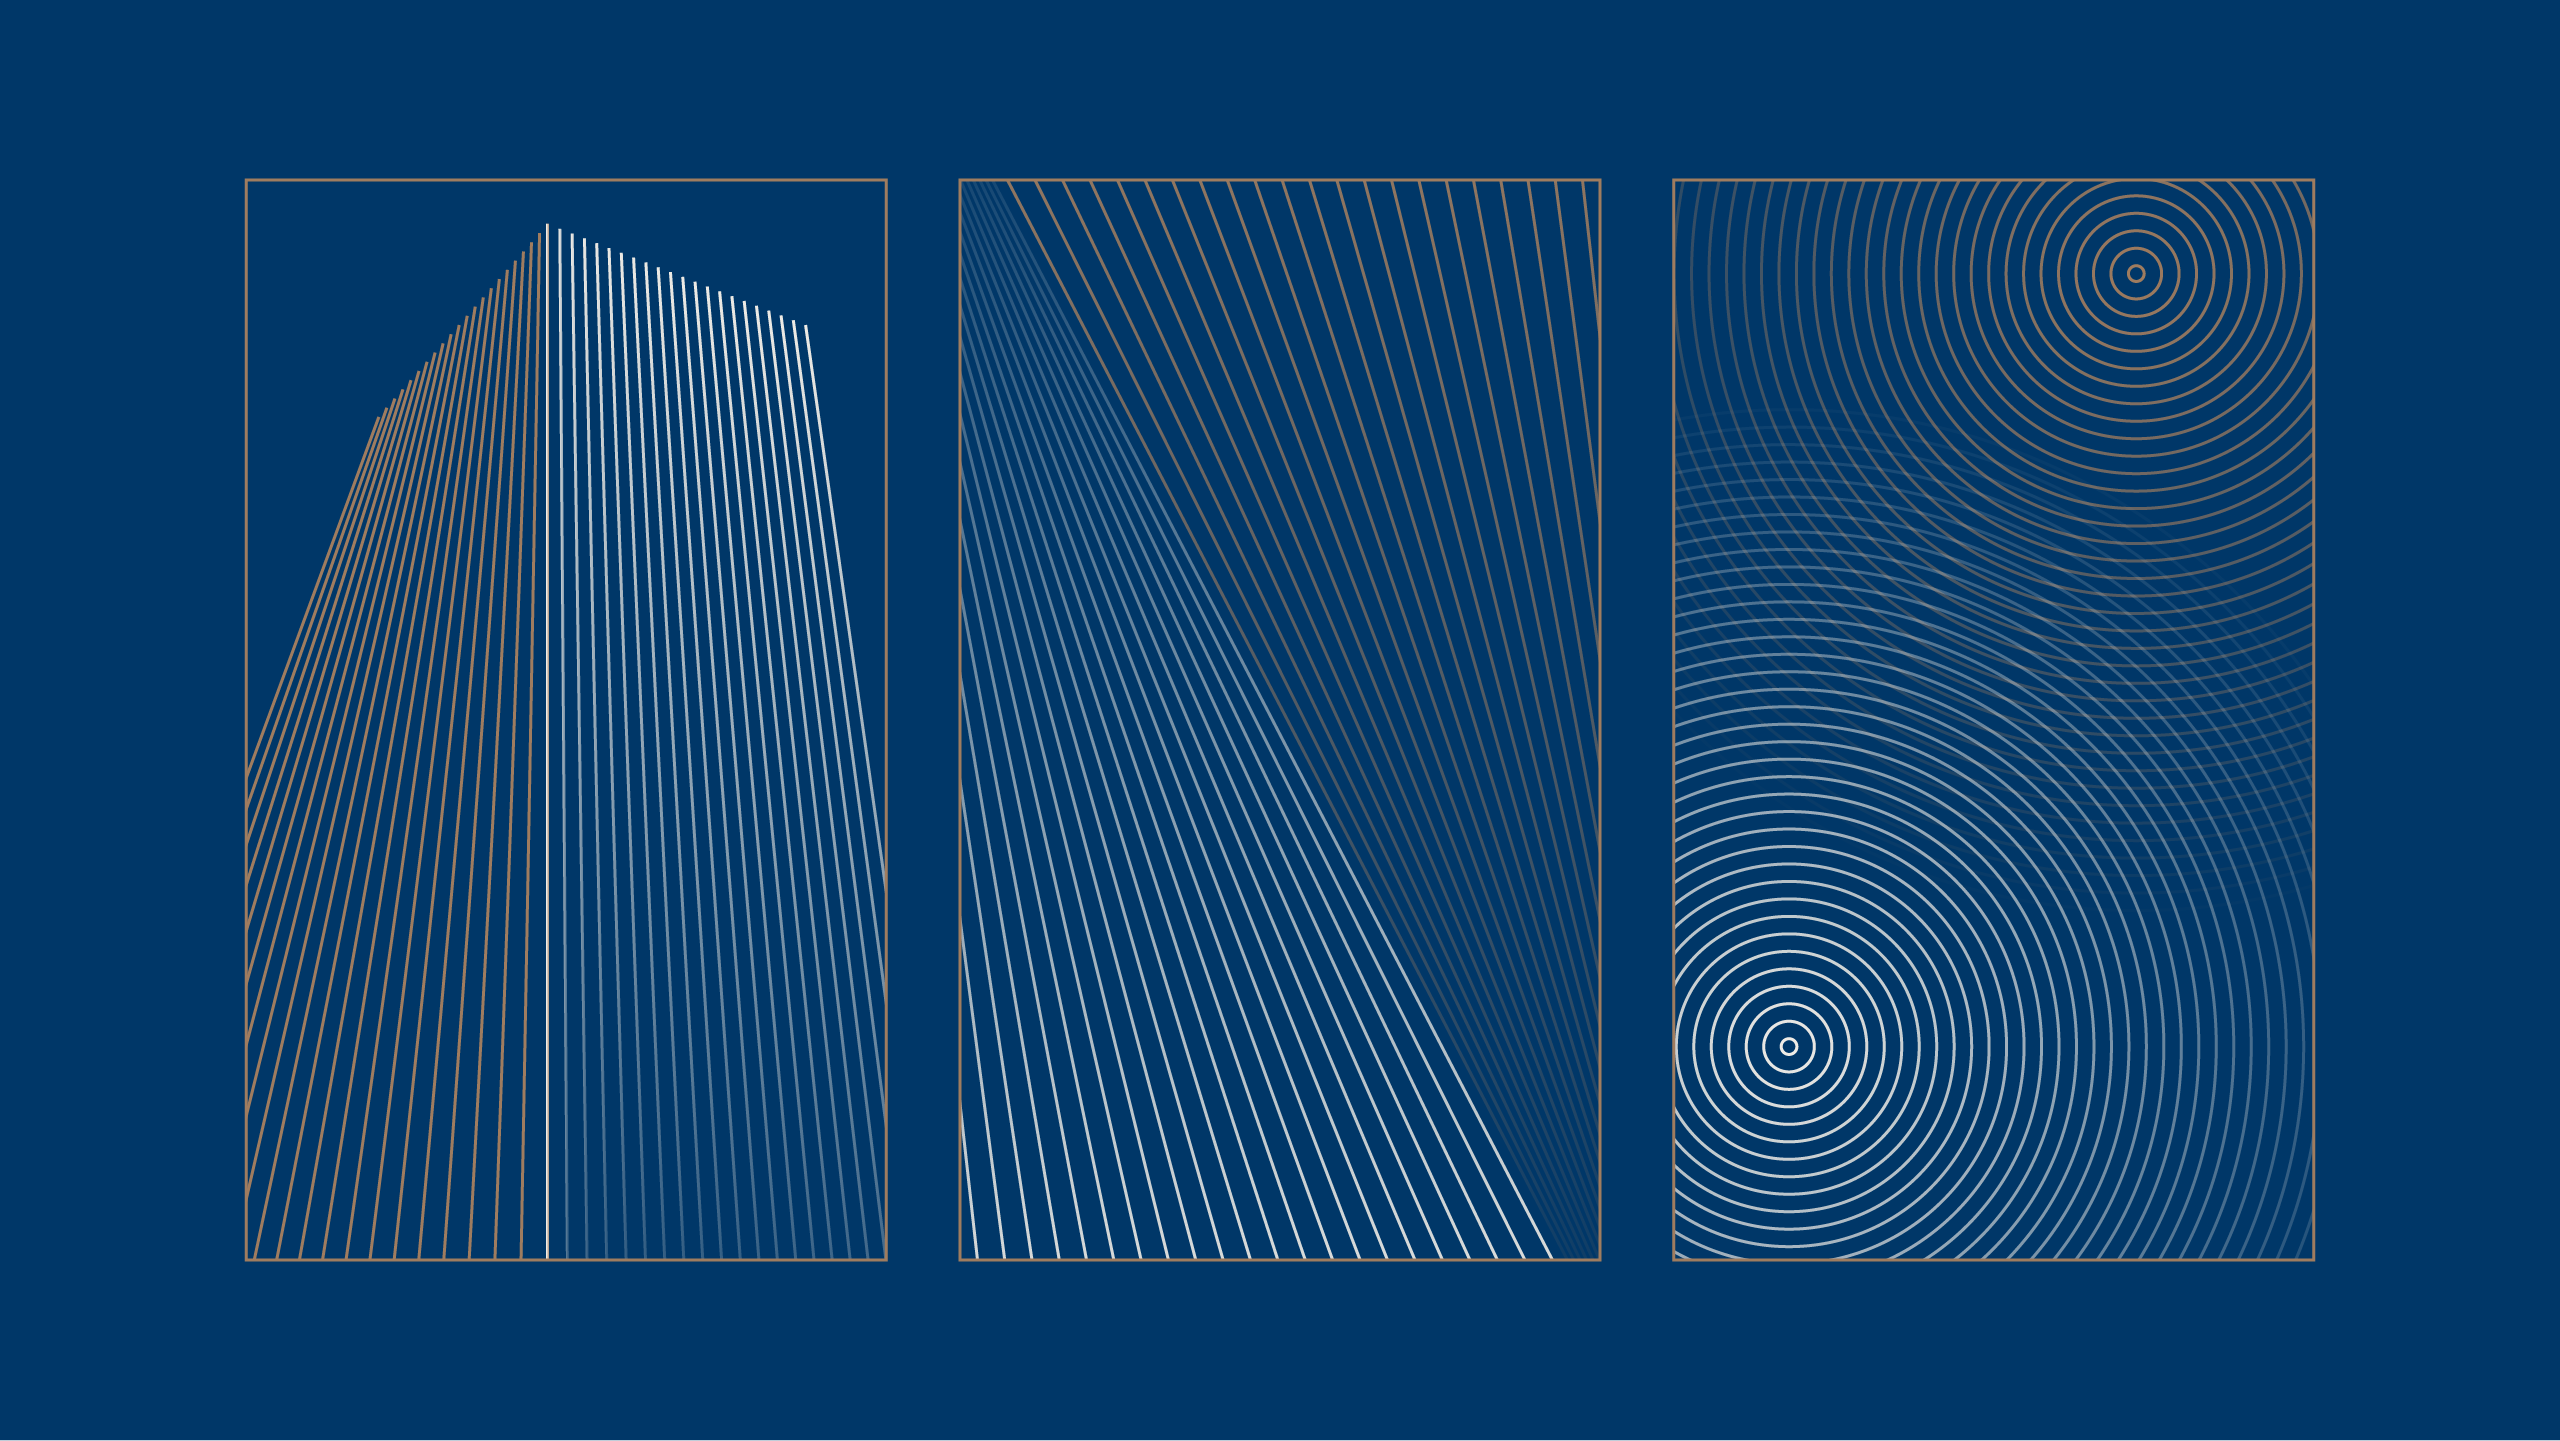 Blue white and gold geometric patterns for real estate brand Alveo a development by Ayala Land